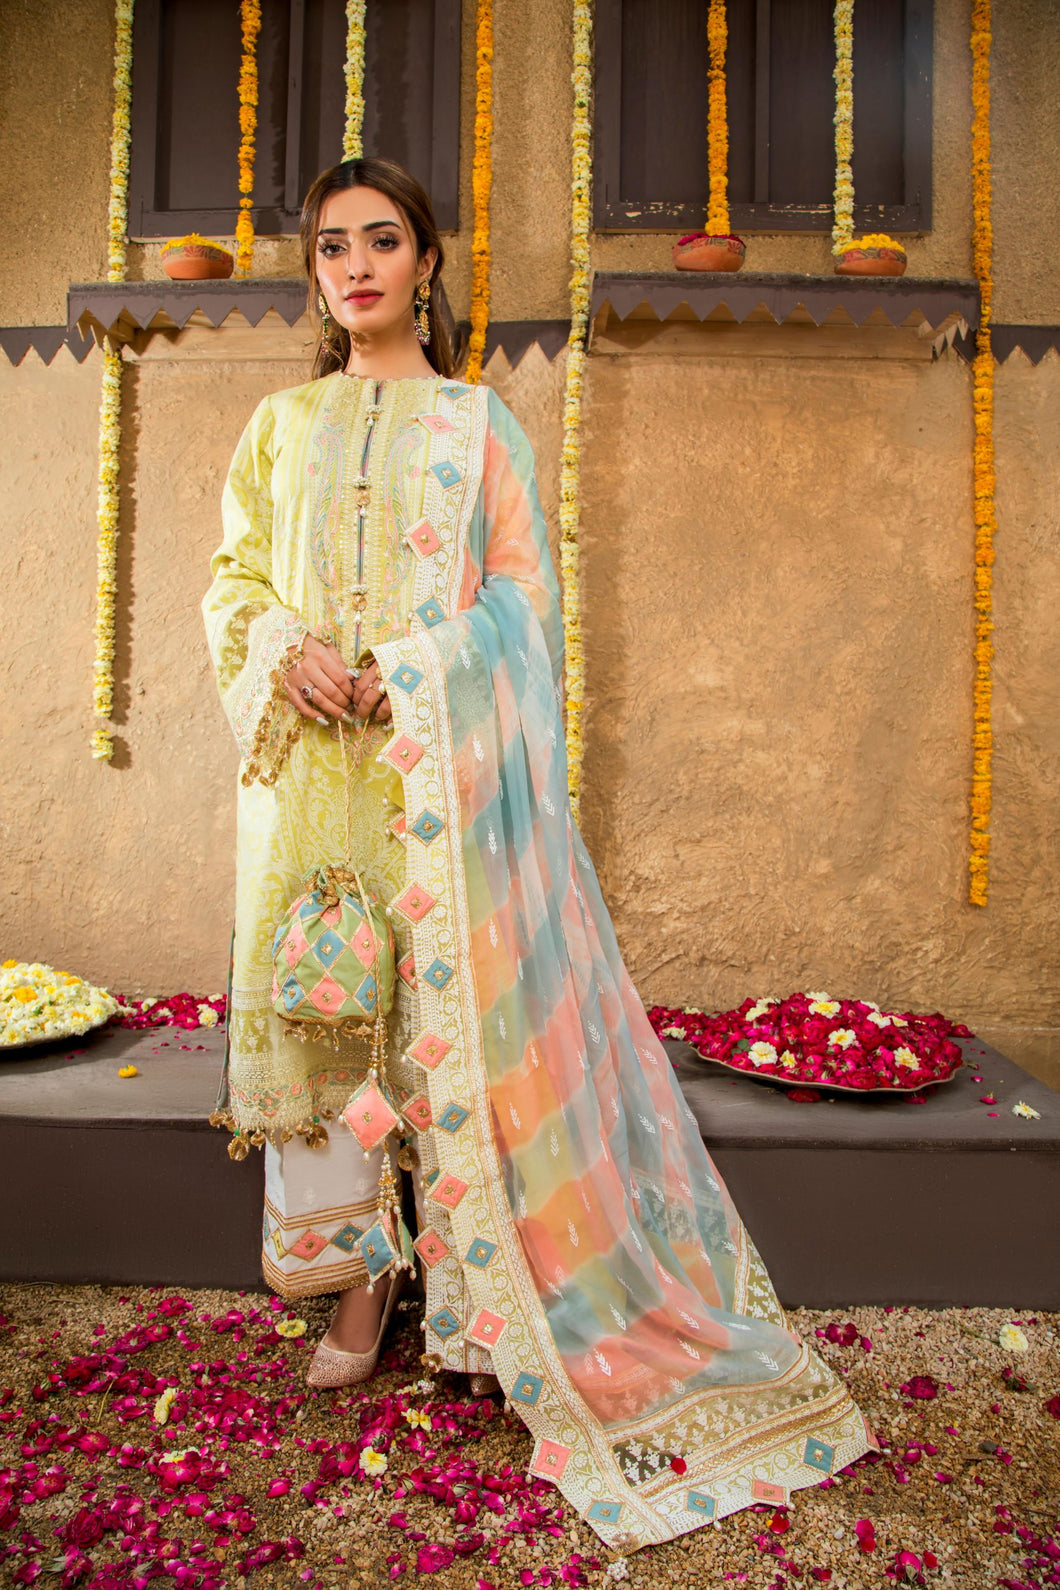 ANAYA by Kiran Chaudhry Lawn 2021 Viva Summer Collection Yellow Dress buy New Pakistani Designer Suits by Anaya Collection Online in the UK & USA. Lebaasonline the largest stockist of  Indian Pakistani designer clothes. Beautiful Pakistani Fashion 21 Eid Lawn clothing for WOMEN in UK, London, Oxford Slough & Reading